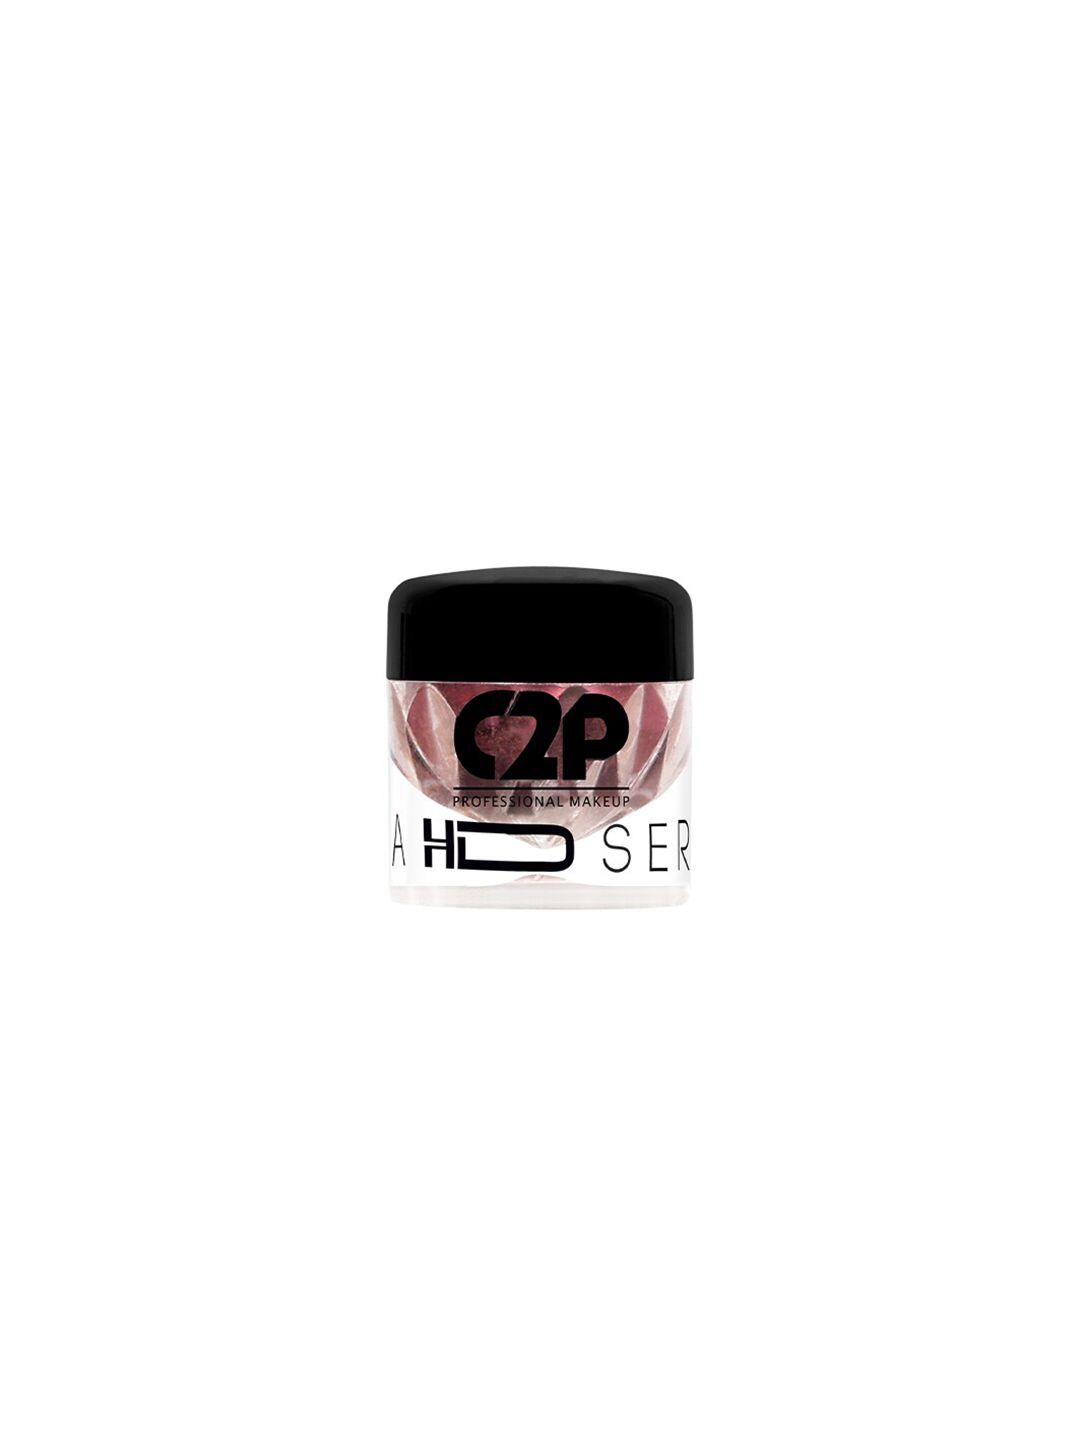 C2P PROFESSIONAL MAKEUP HD Loose Precious Pigments Eyeshadow - Queen's Time 123 Price in India